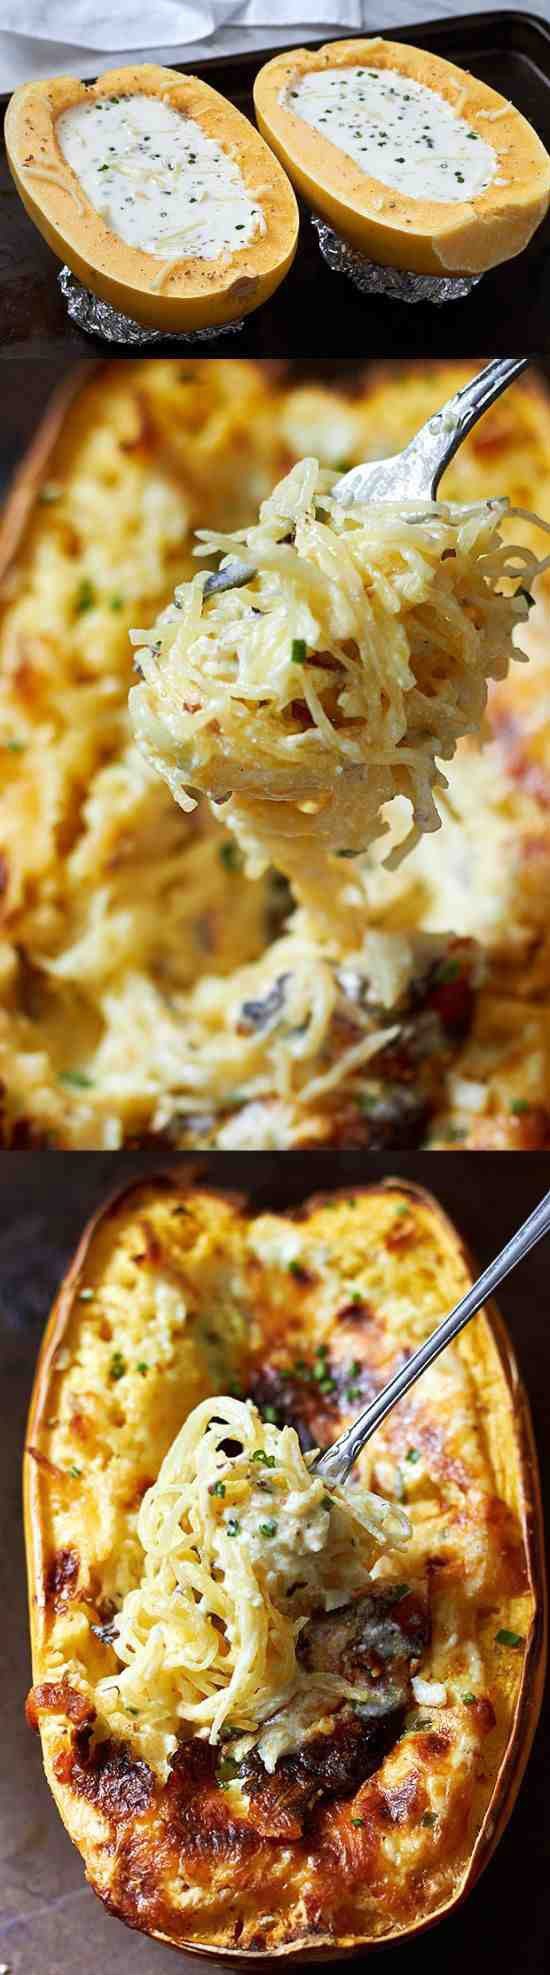 Spaghetti Squash Recipe – #eatwell101 #recipe #keto #lowcarb #glutenfree - Stuffed with a creamy garlic and 4-cheese sauce – LOW CARB and so COMFORTING!